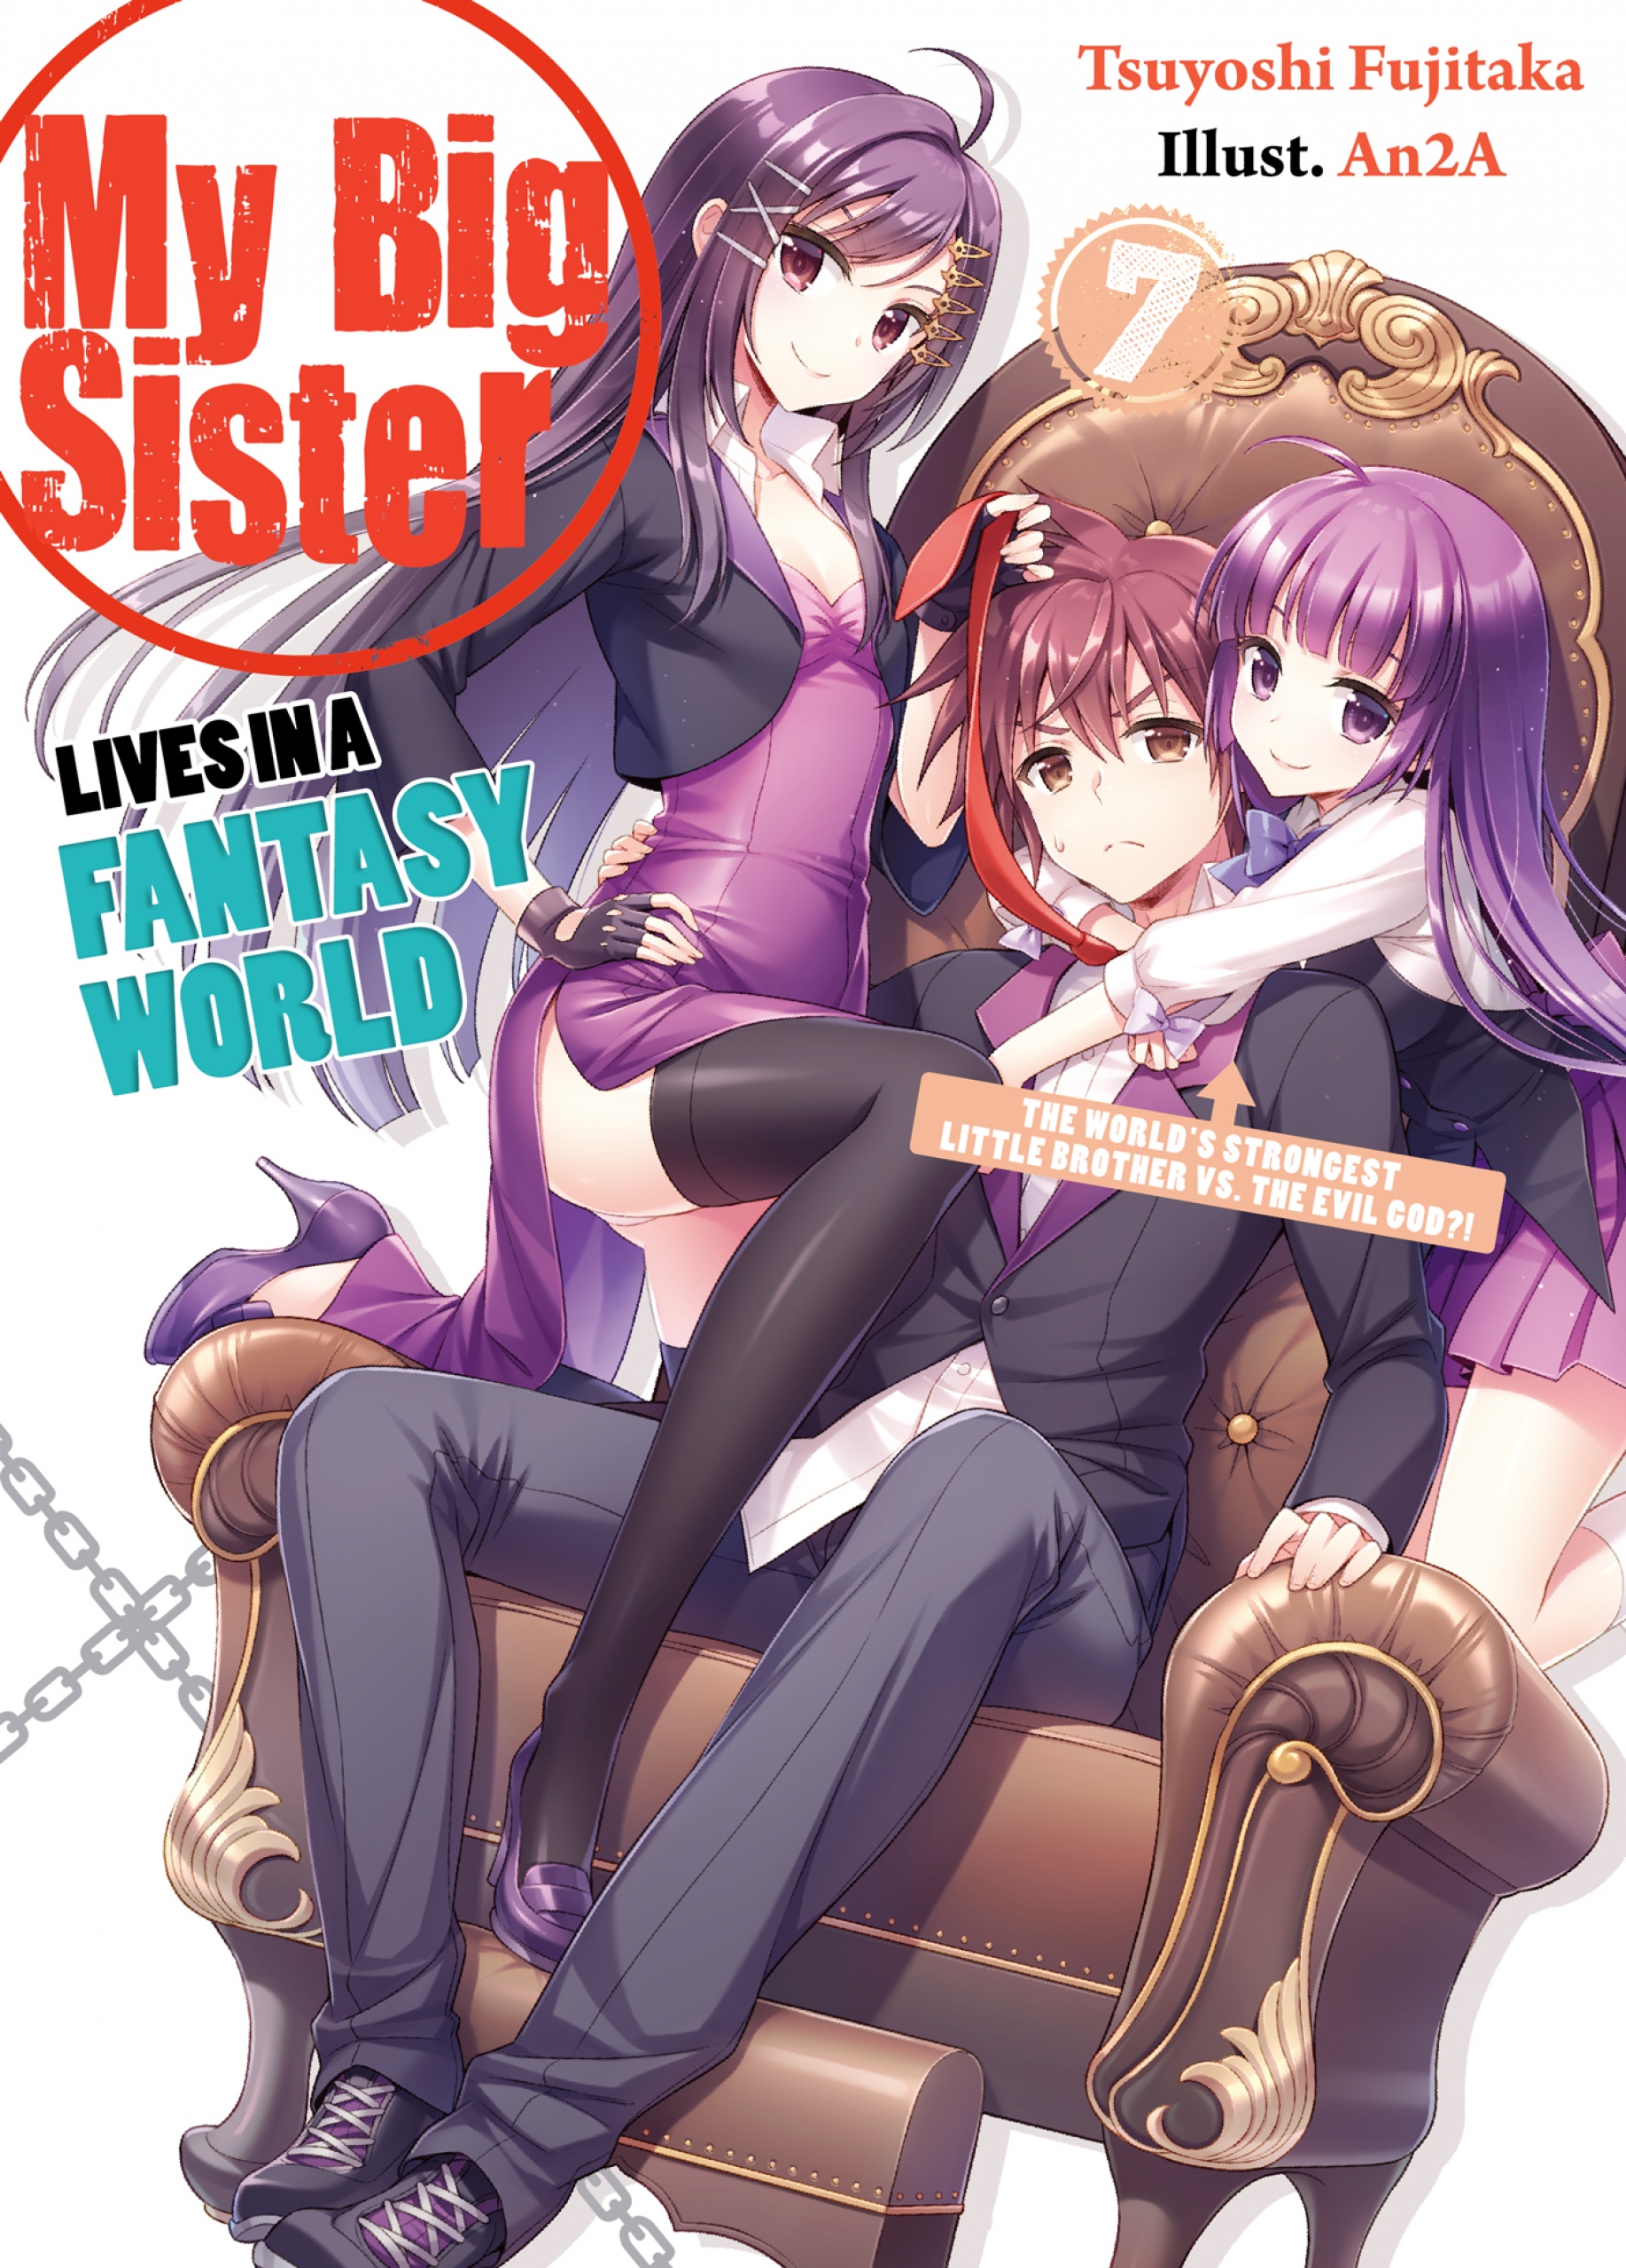 My Big Sister Lives in a Fantasy World: Volume 7